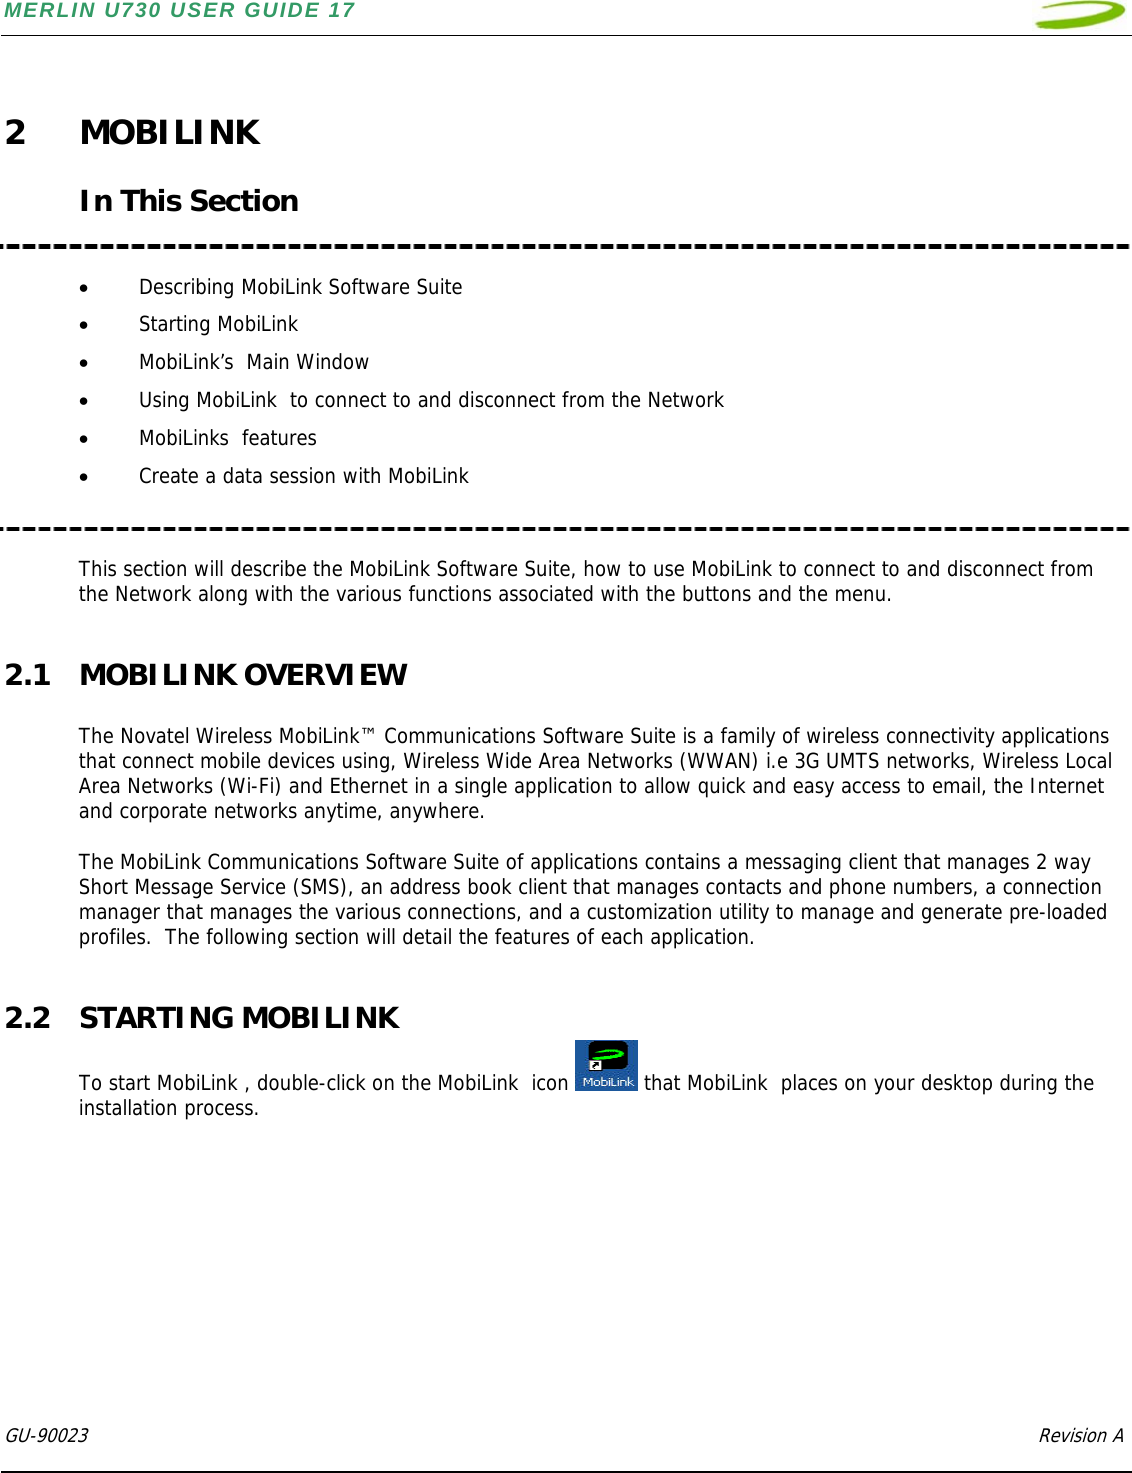 MERLIN U730 USER GUIDE 17  GU-90023            Revision A    2 MOBILINK  In This Section   • Describing MobiLink Software Suite • Starting MobiLink  • MobiLink’s  Main Window • Using MobiLink  to connect to and disconnect from the Network     • MobiLinks  features  • Create a data session with MobiLink    This section will describe the MobiLink Software Suite, how to use MobiLink to connect to and disconnect from the Network along with the various functions associated with the buttons and the menu.  2.1 MOBILINK OVERVIEW  The Novatel Wireless MobiLink™ Communications Software Suite is a family of wireless connectivity applications that connect mobile devices using, Wireless Wide Area Networks (WWAN) i.e 3G UMTS networks, Wireless Local Area Networks (Wi-Fi) and Ethernet in a single application to allow quick and easy access to email, the Internet and corporate networks anytime, anywhere.  The MobiLink Communications Software Suite of applications contains a messaging client that manages 2 way Short Message Service (SMS), an address book client that manages contacts and phone numbers, a connection manager that manages the various connections, and a customization utility to manage and generate pre-loaded profiles.  The following section will detail the features of each application.  2.2 STARTING MOBILINK To start MobiLink , double-click on the MobiLink  icon   that MobiLink  places on your desktop during the installation process.  